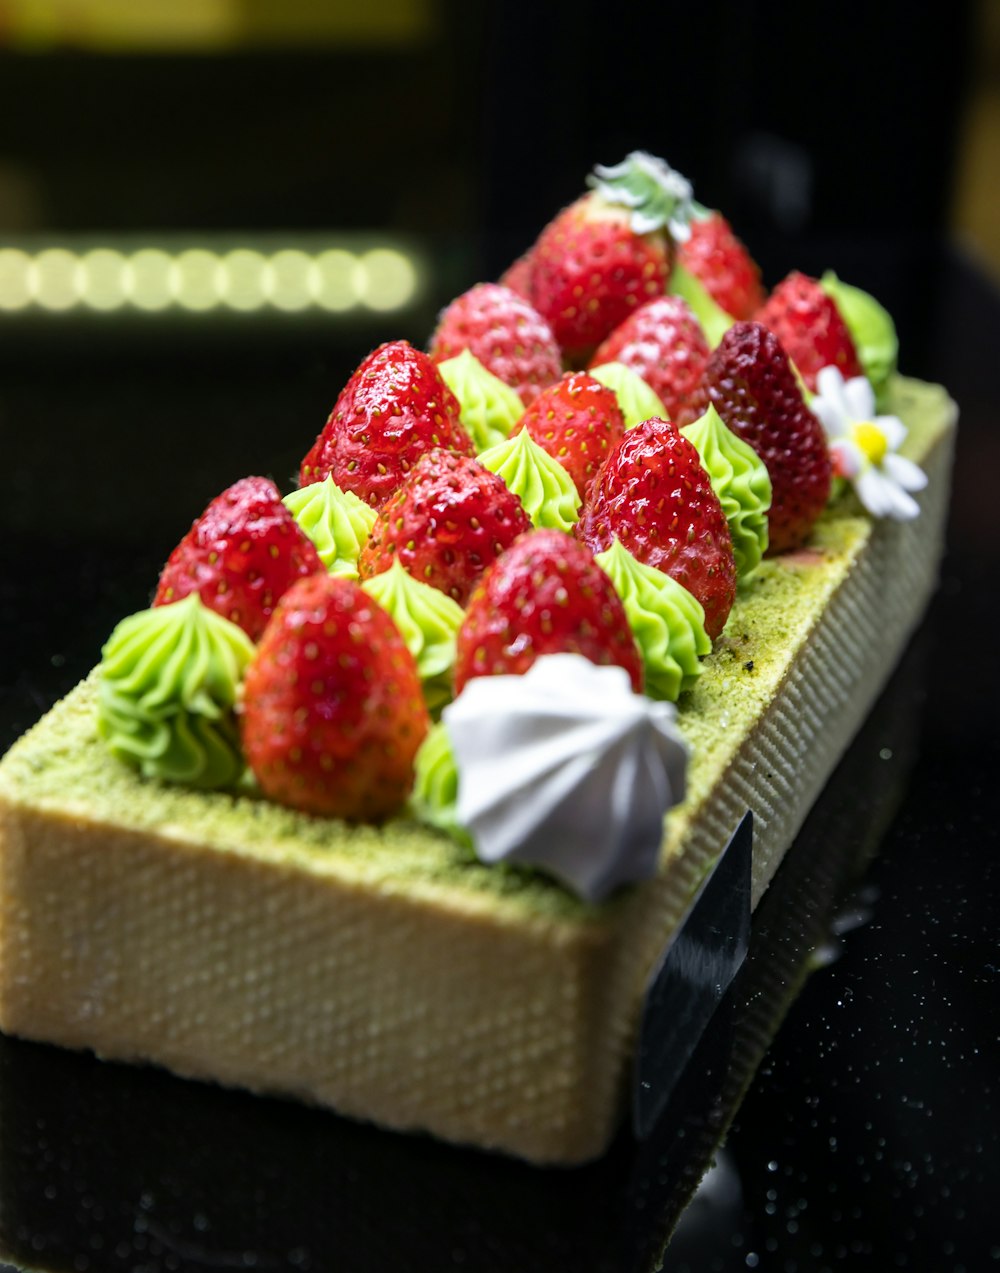 a close up of a piece of cake with strawberries on it